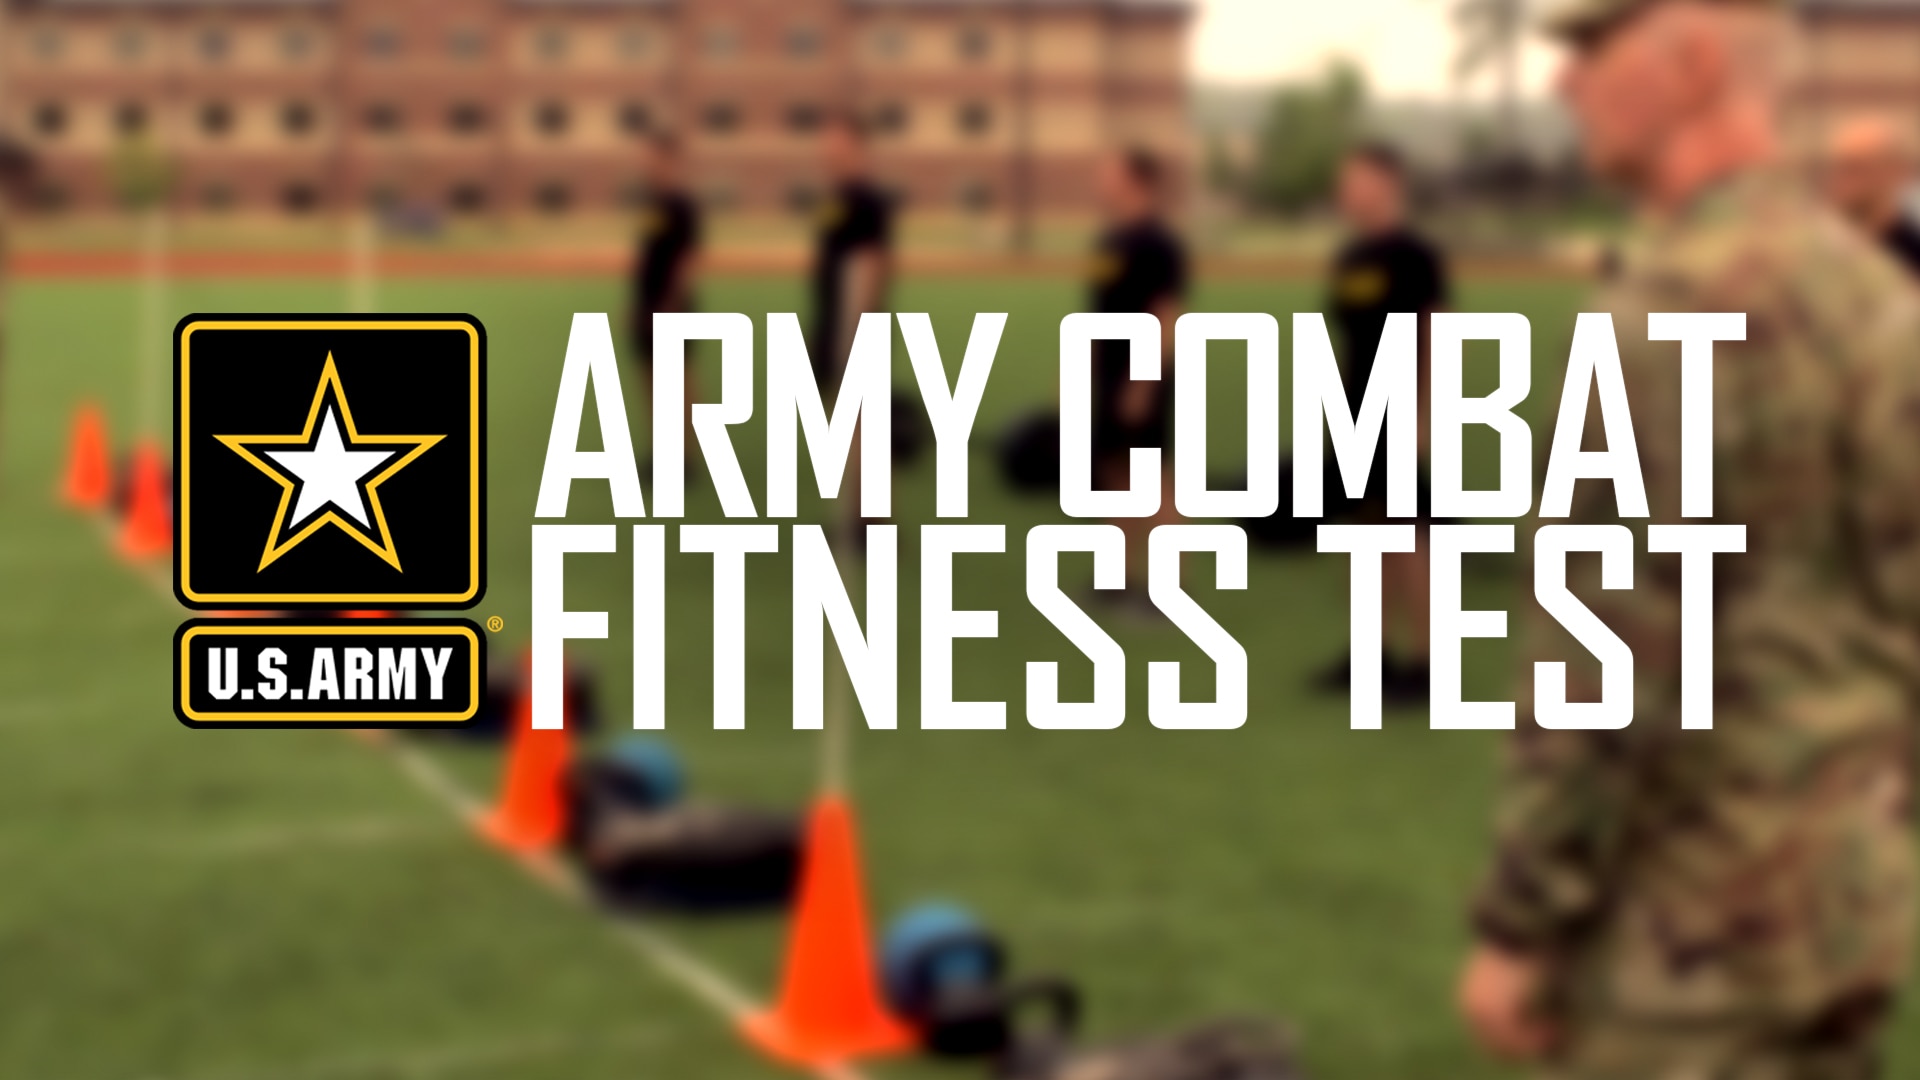 Army Apft Chart 22 26